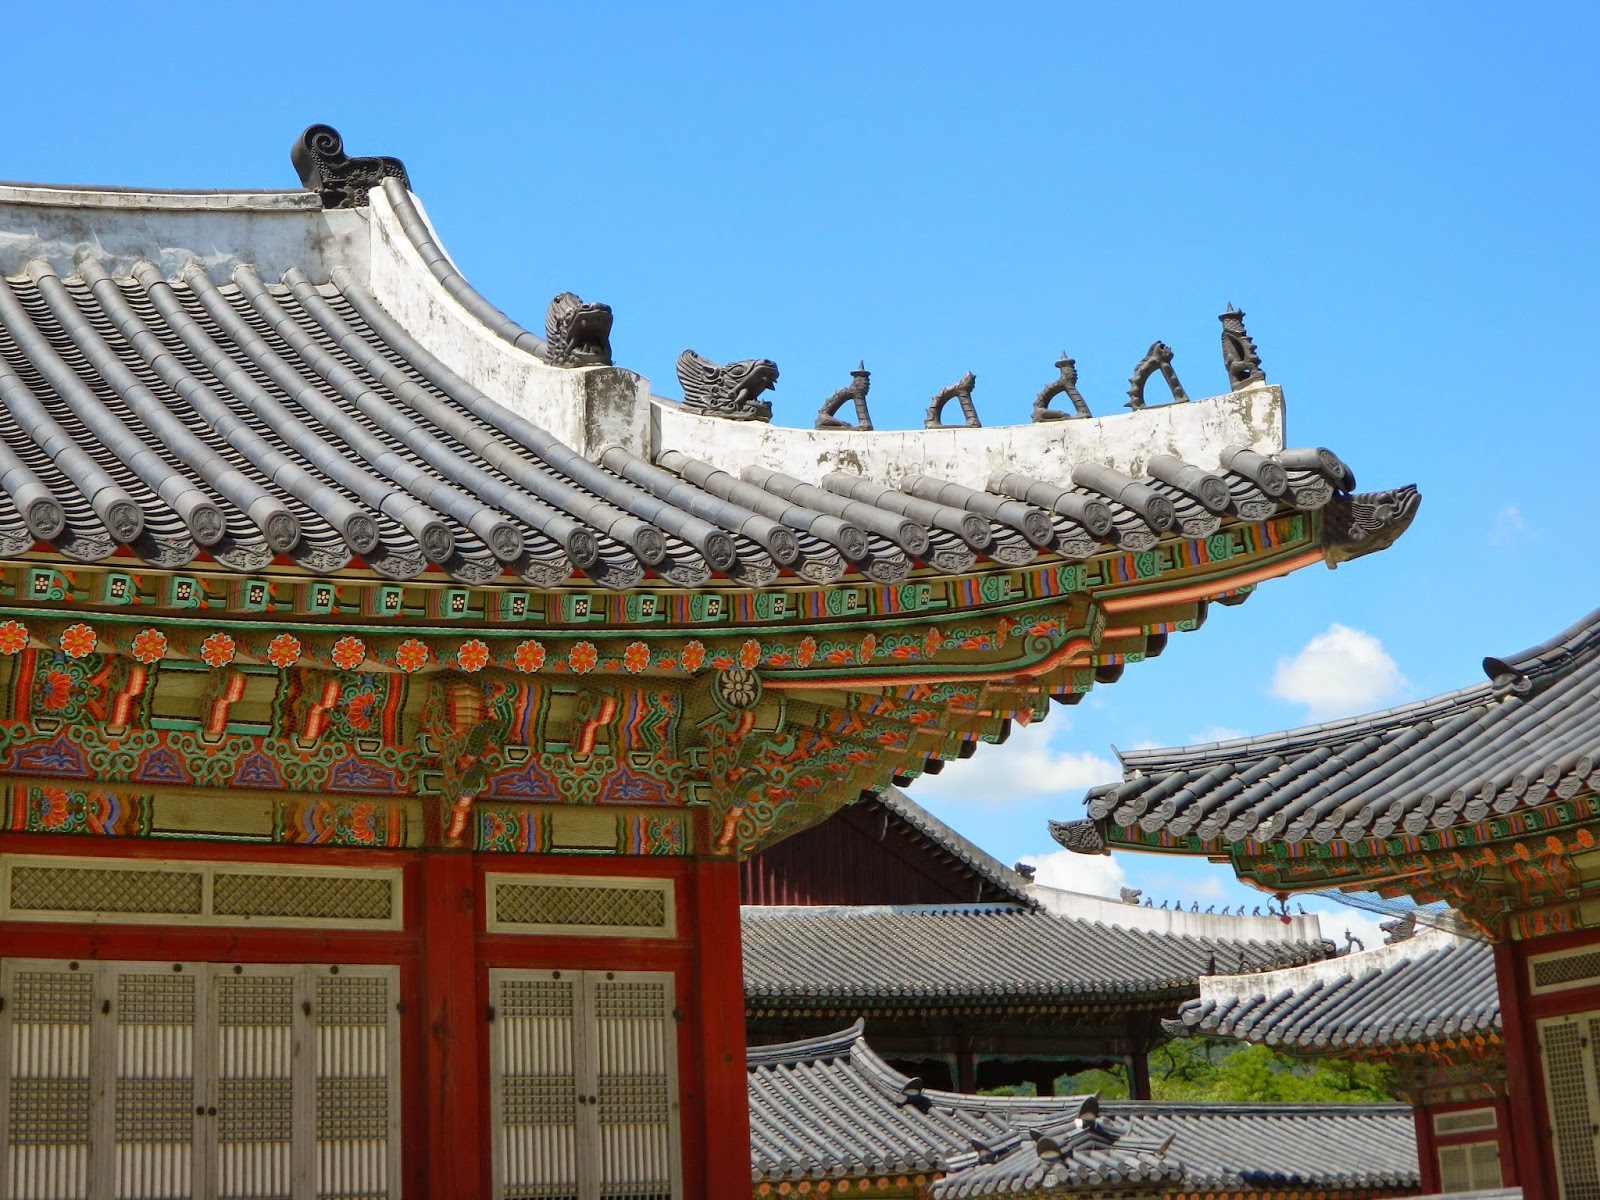 Slopey roofs of the Gyeongbokgung